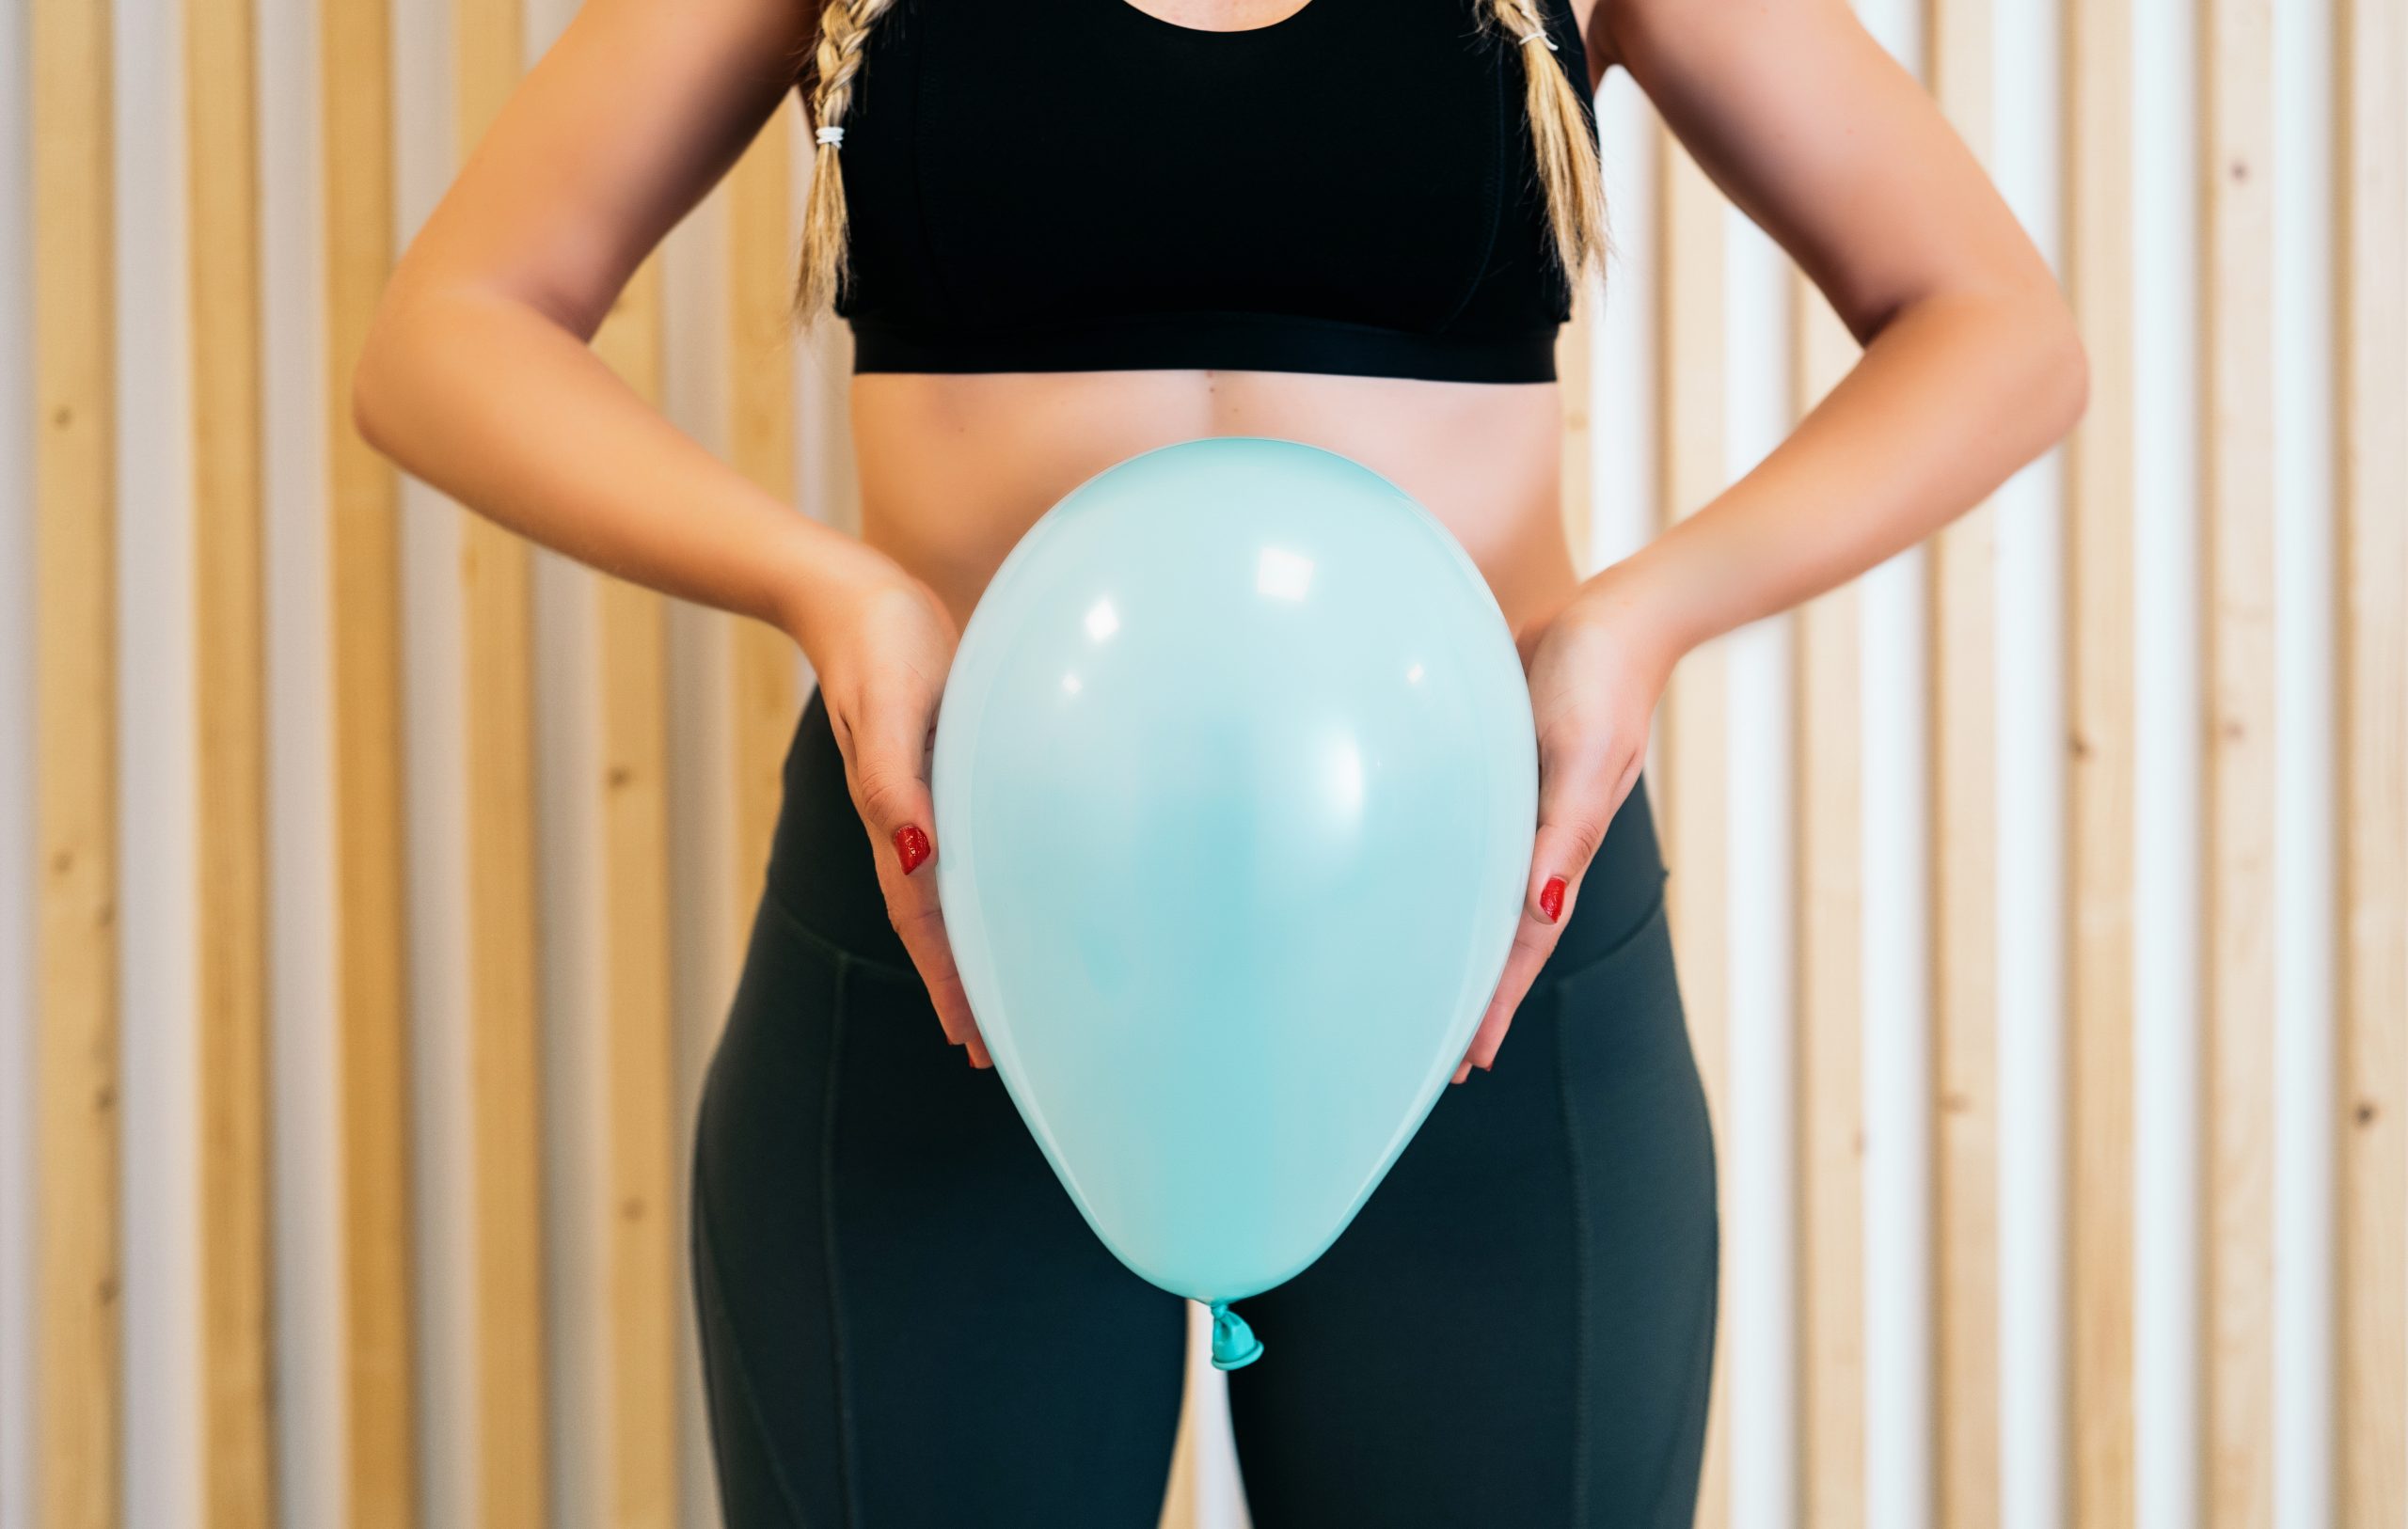 Why is pelvic floor physiotherapy important for women?